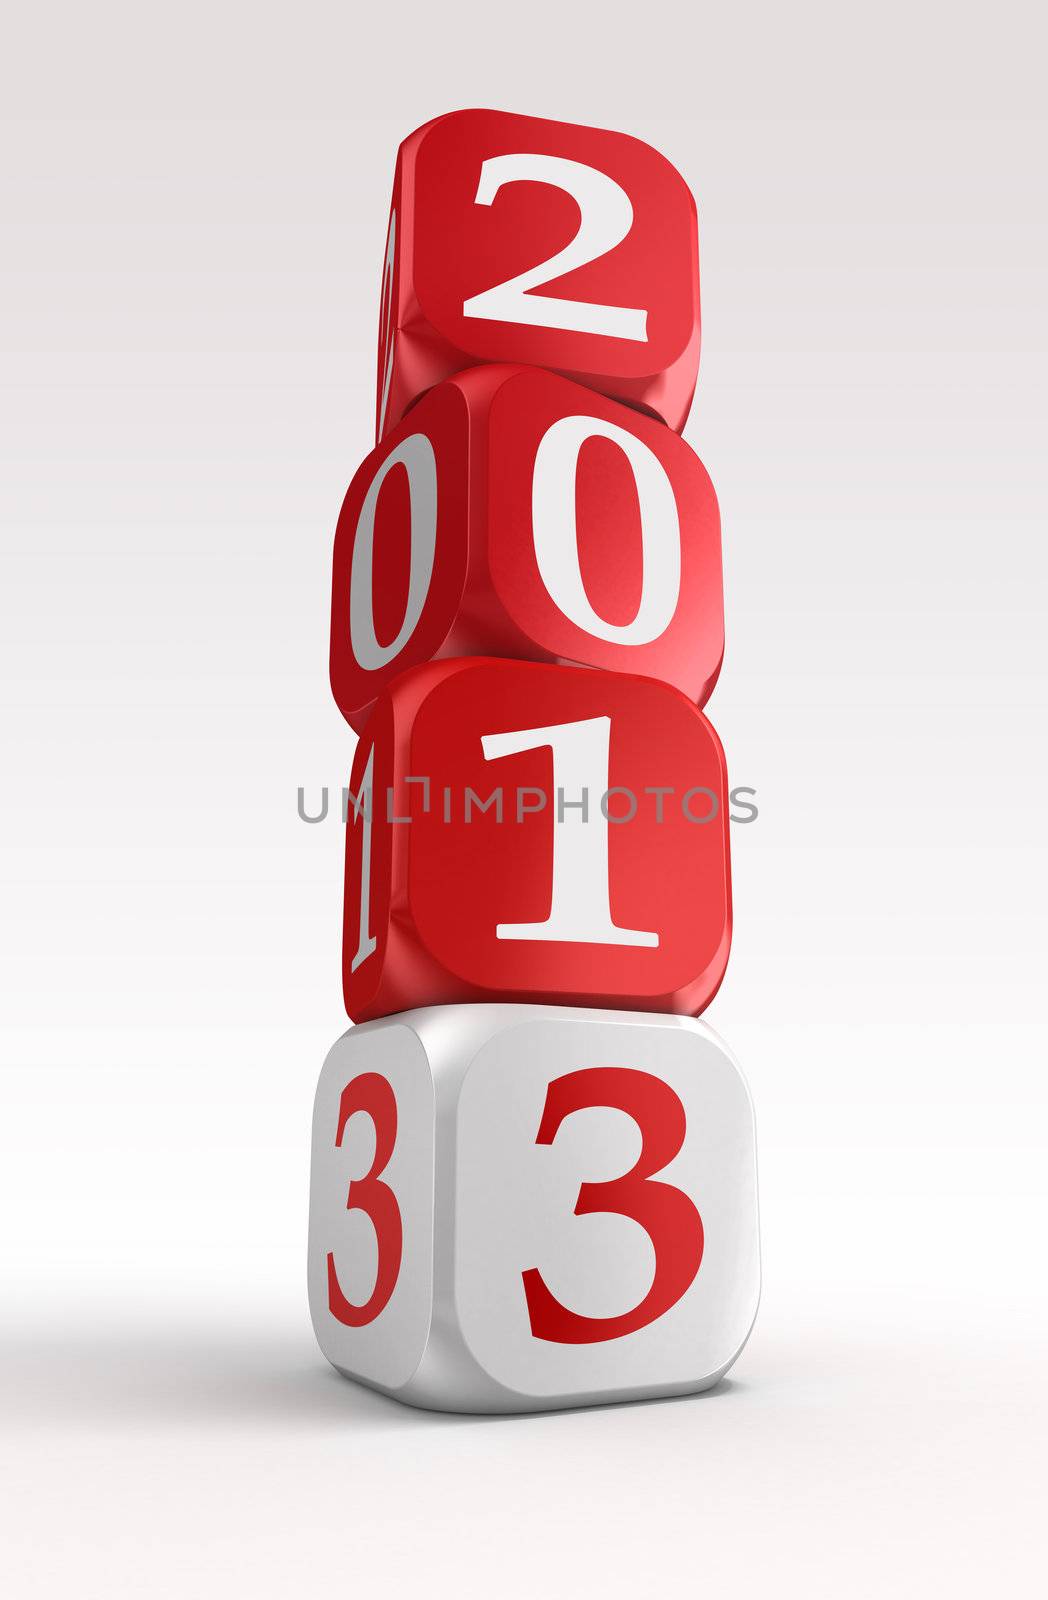 new year 2013 3d red and white box tower on white background.clipping path included